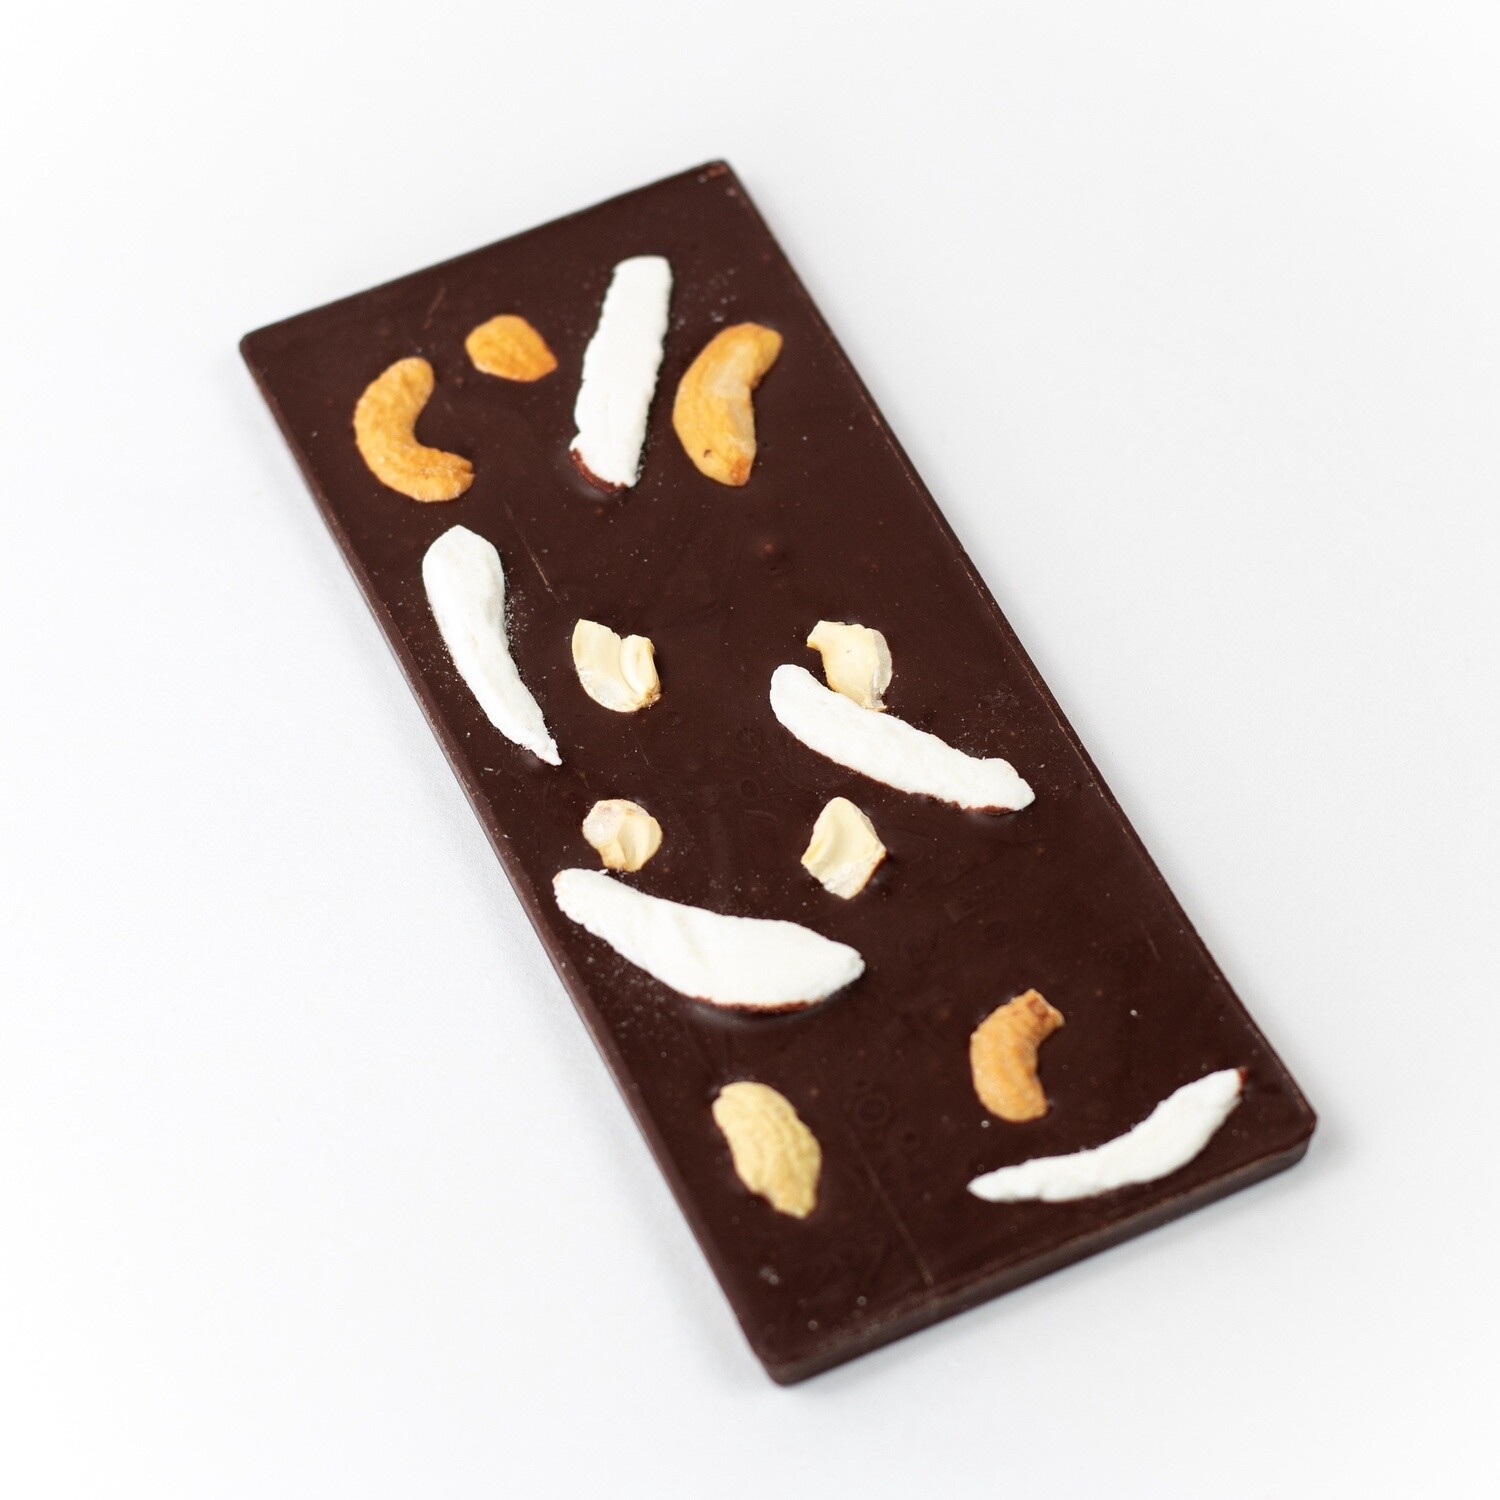 Coco Andre S'mores Chocolate Bar